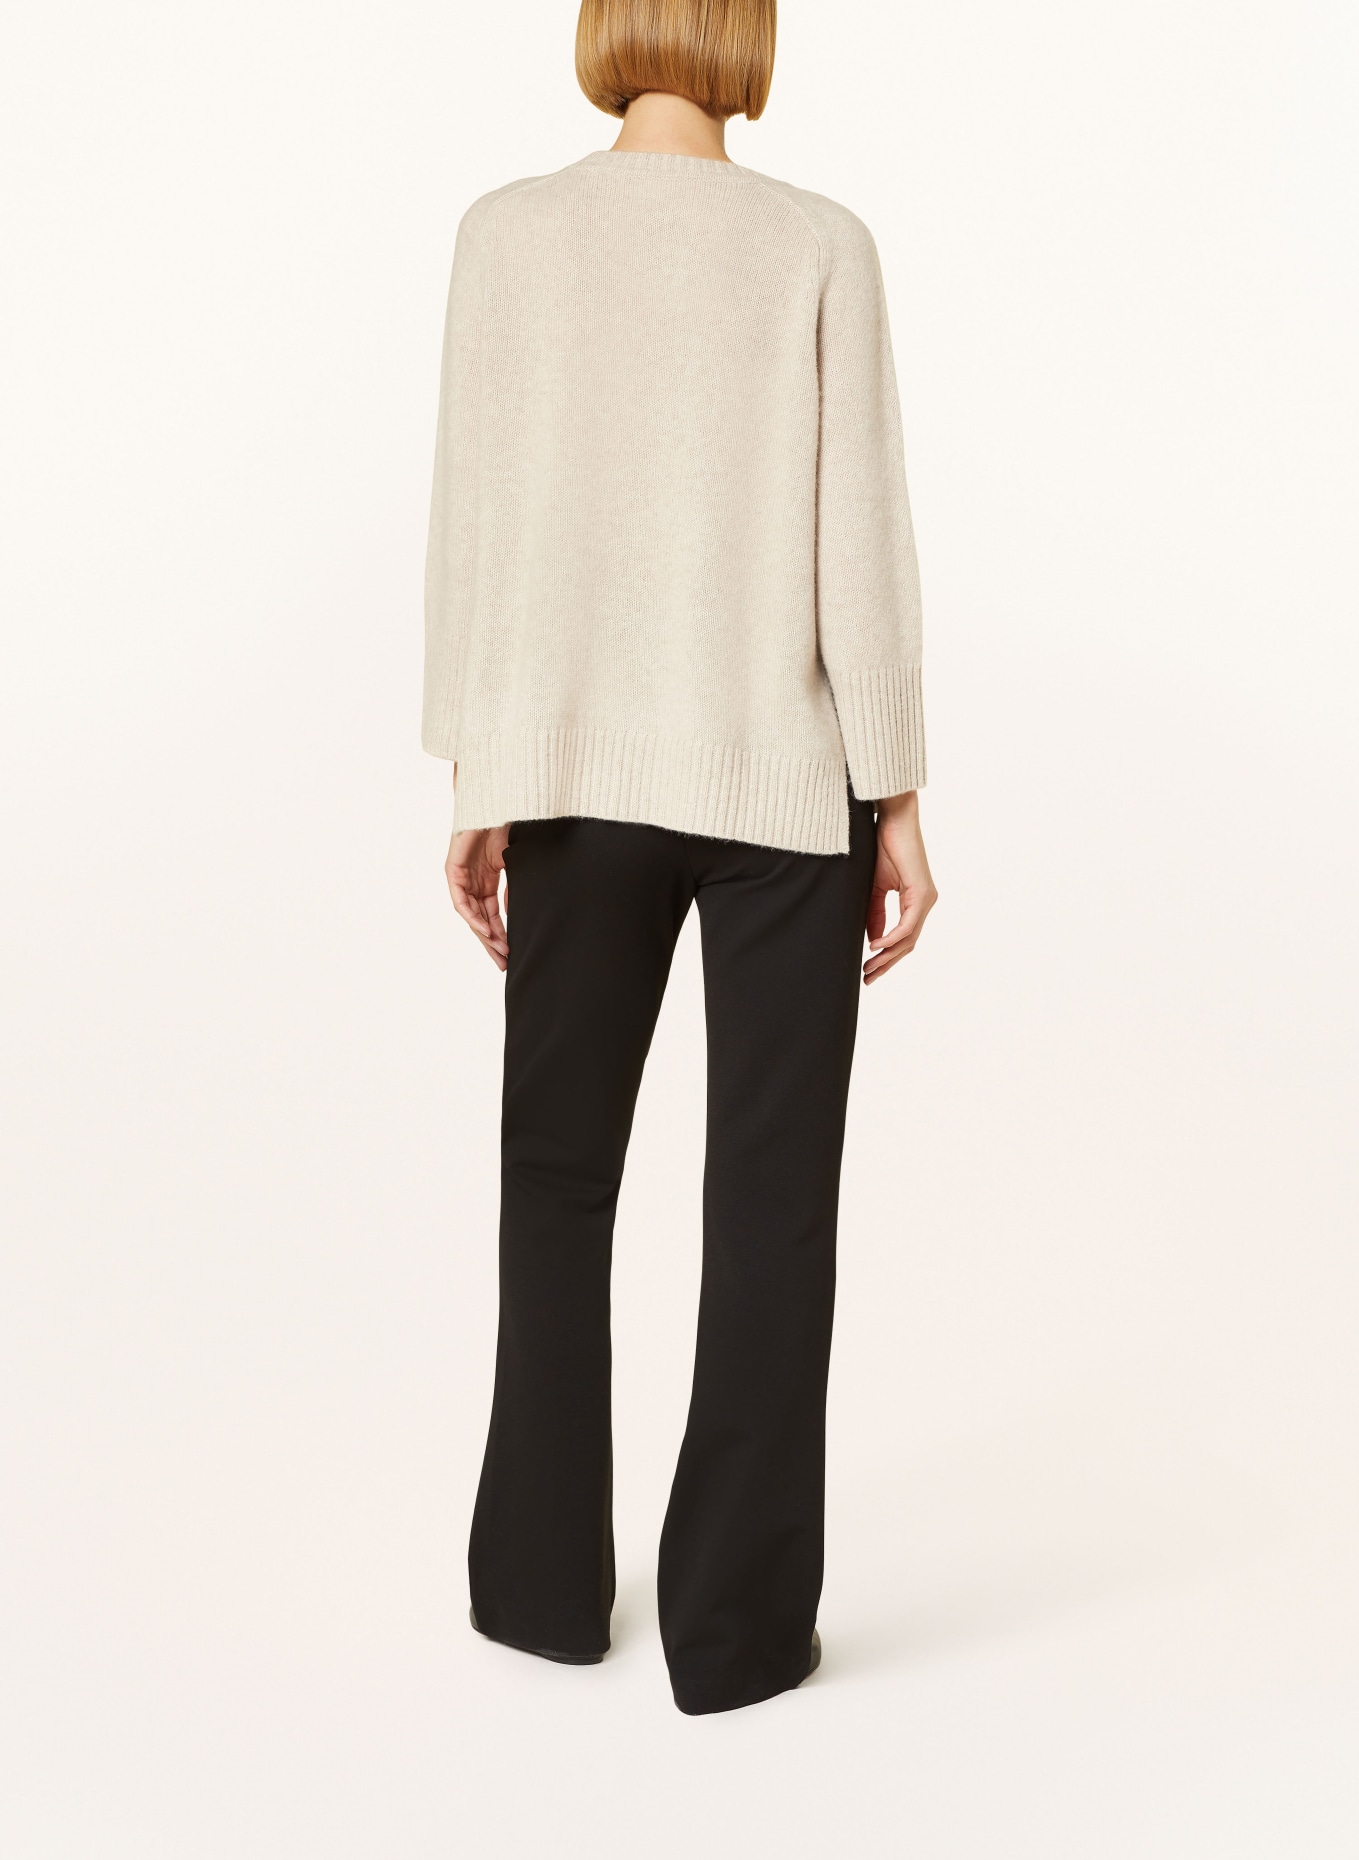 HEMISPHERE Sweater with cashmere, Color: BEIGE (Image 3)